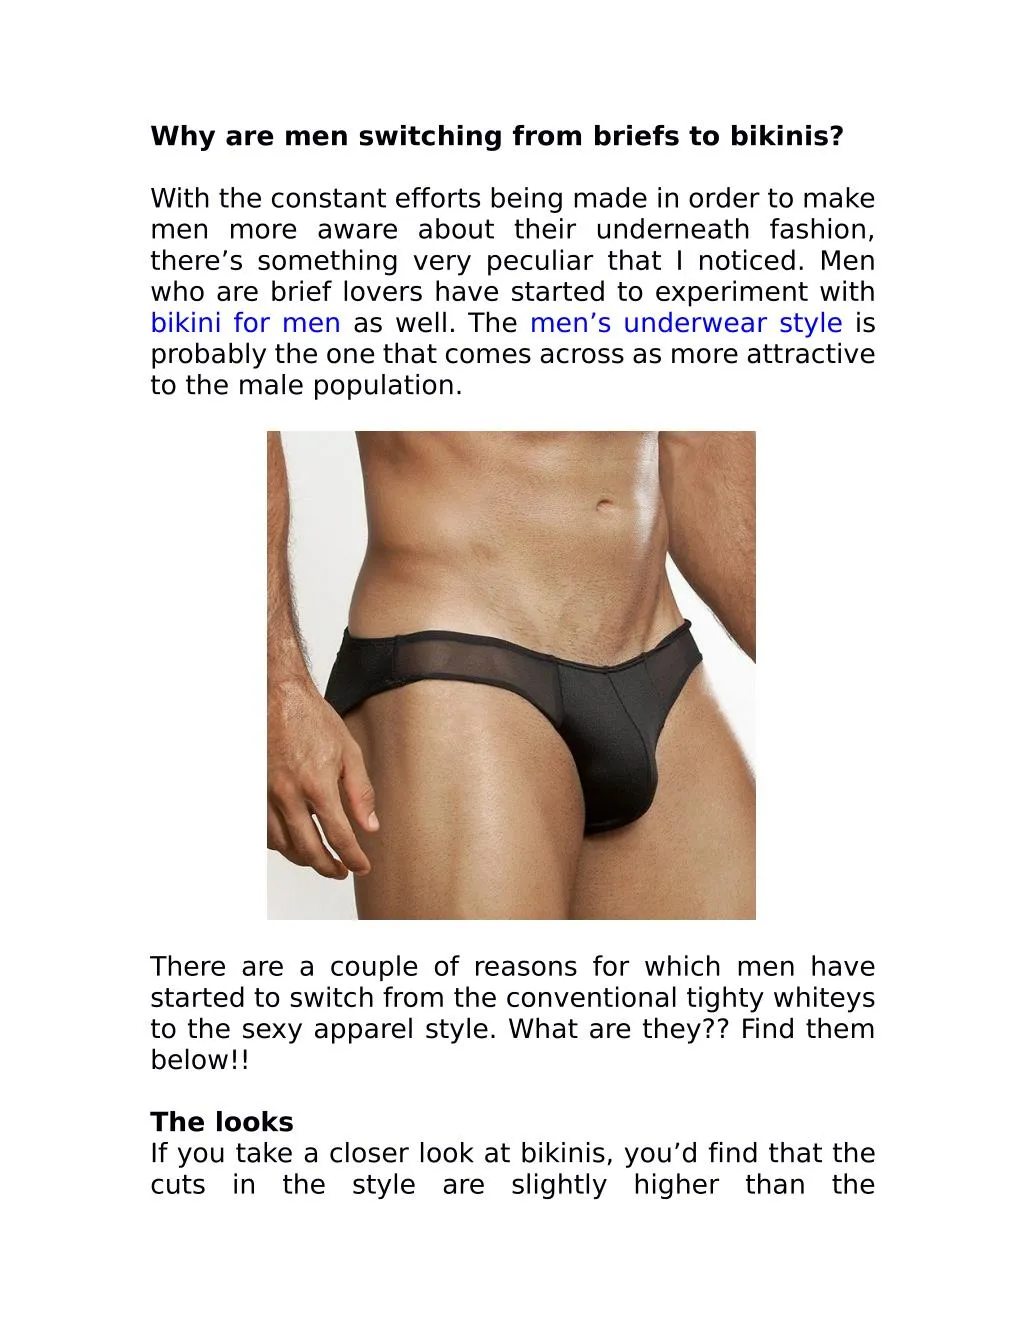 why are men switching from briefs to bikinis